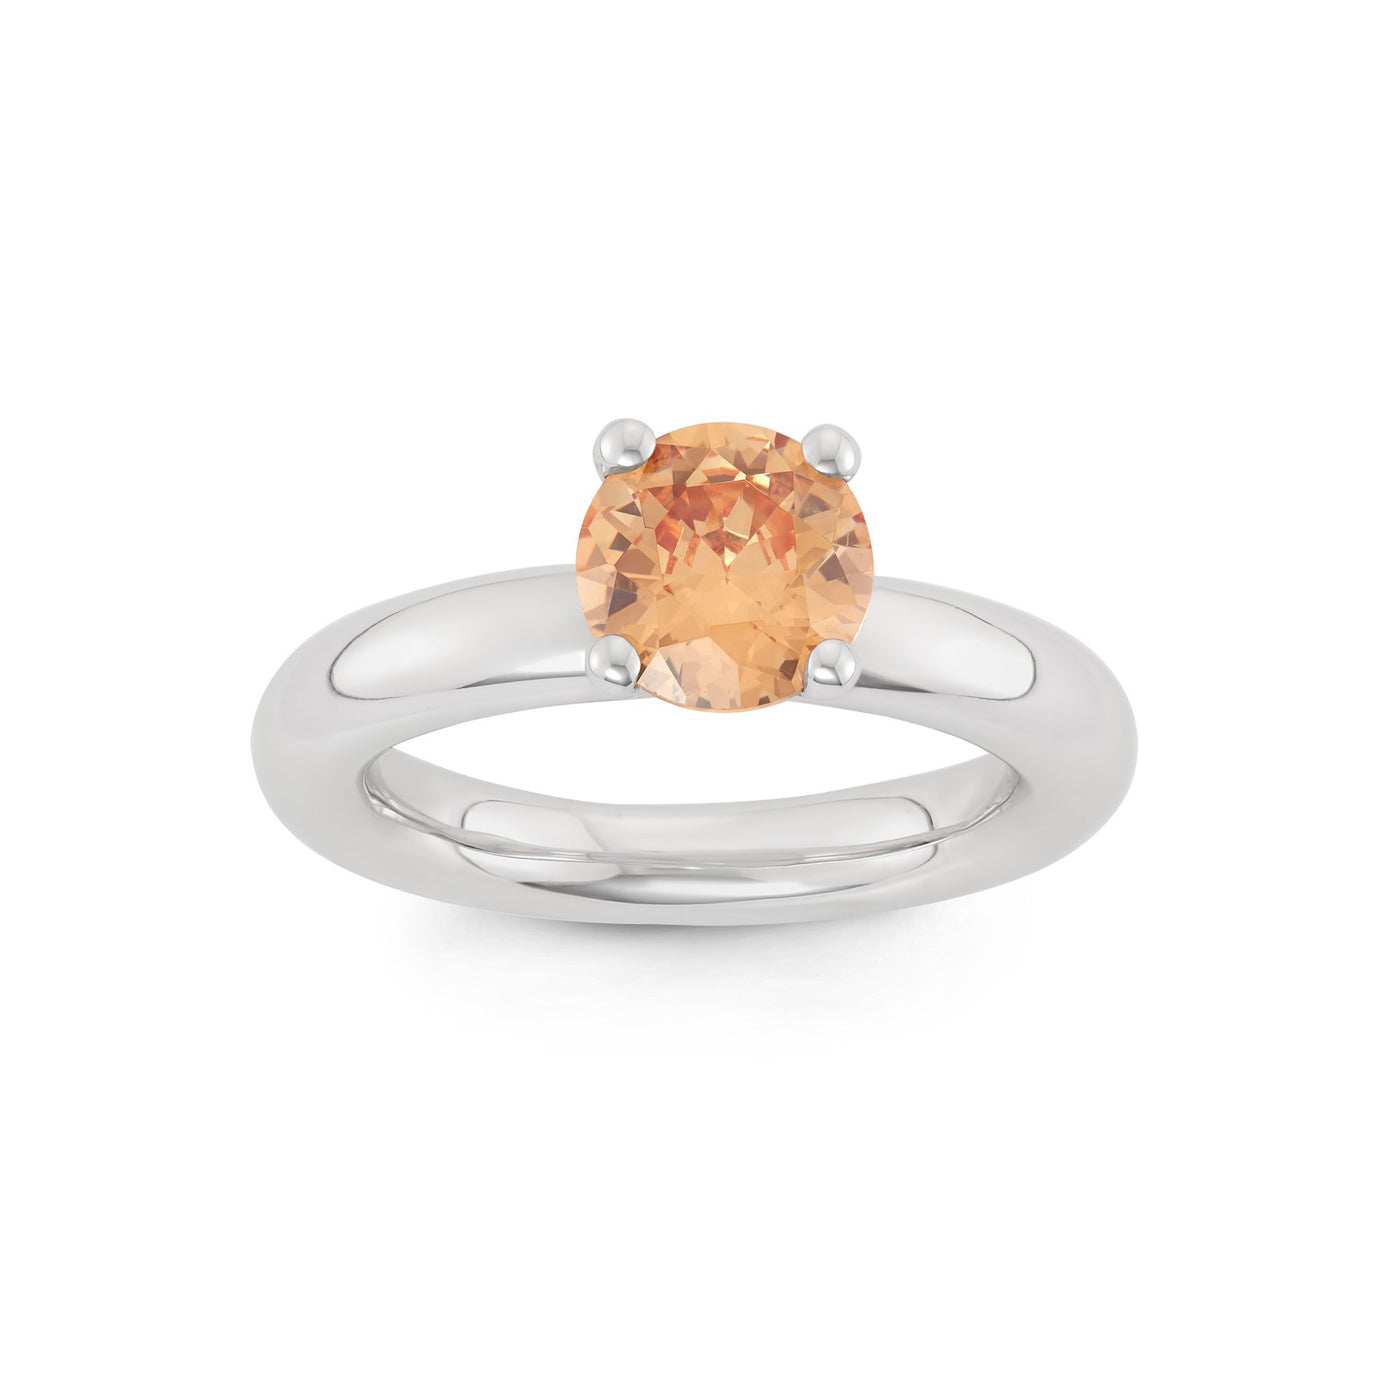 Sterling Silver Spinning Ring With Faceted Champagne Round CZ Center Stone